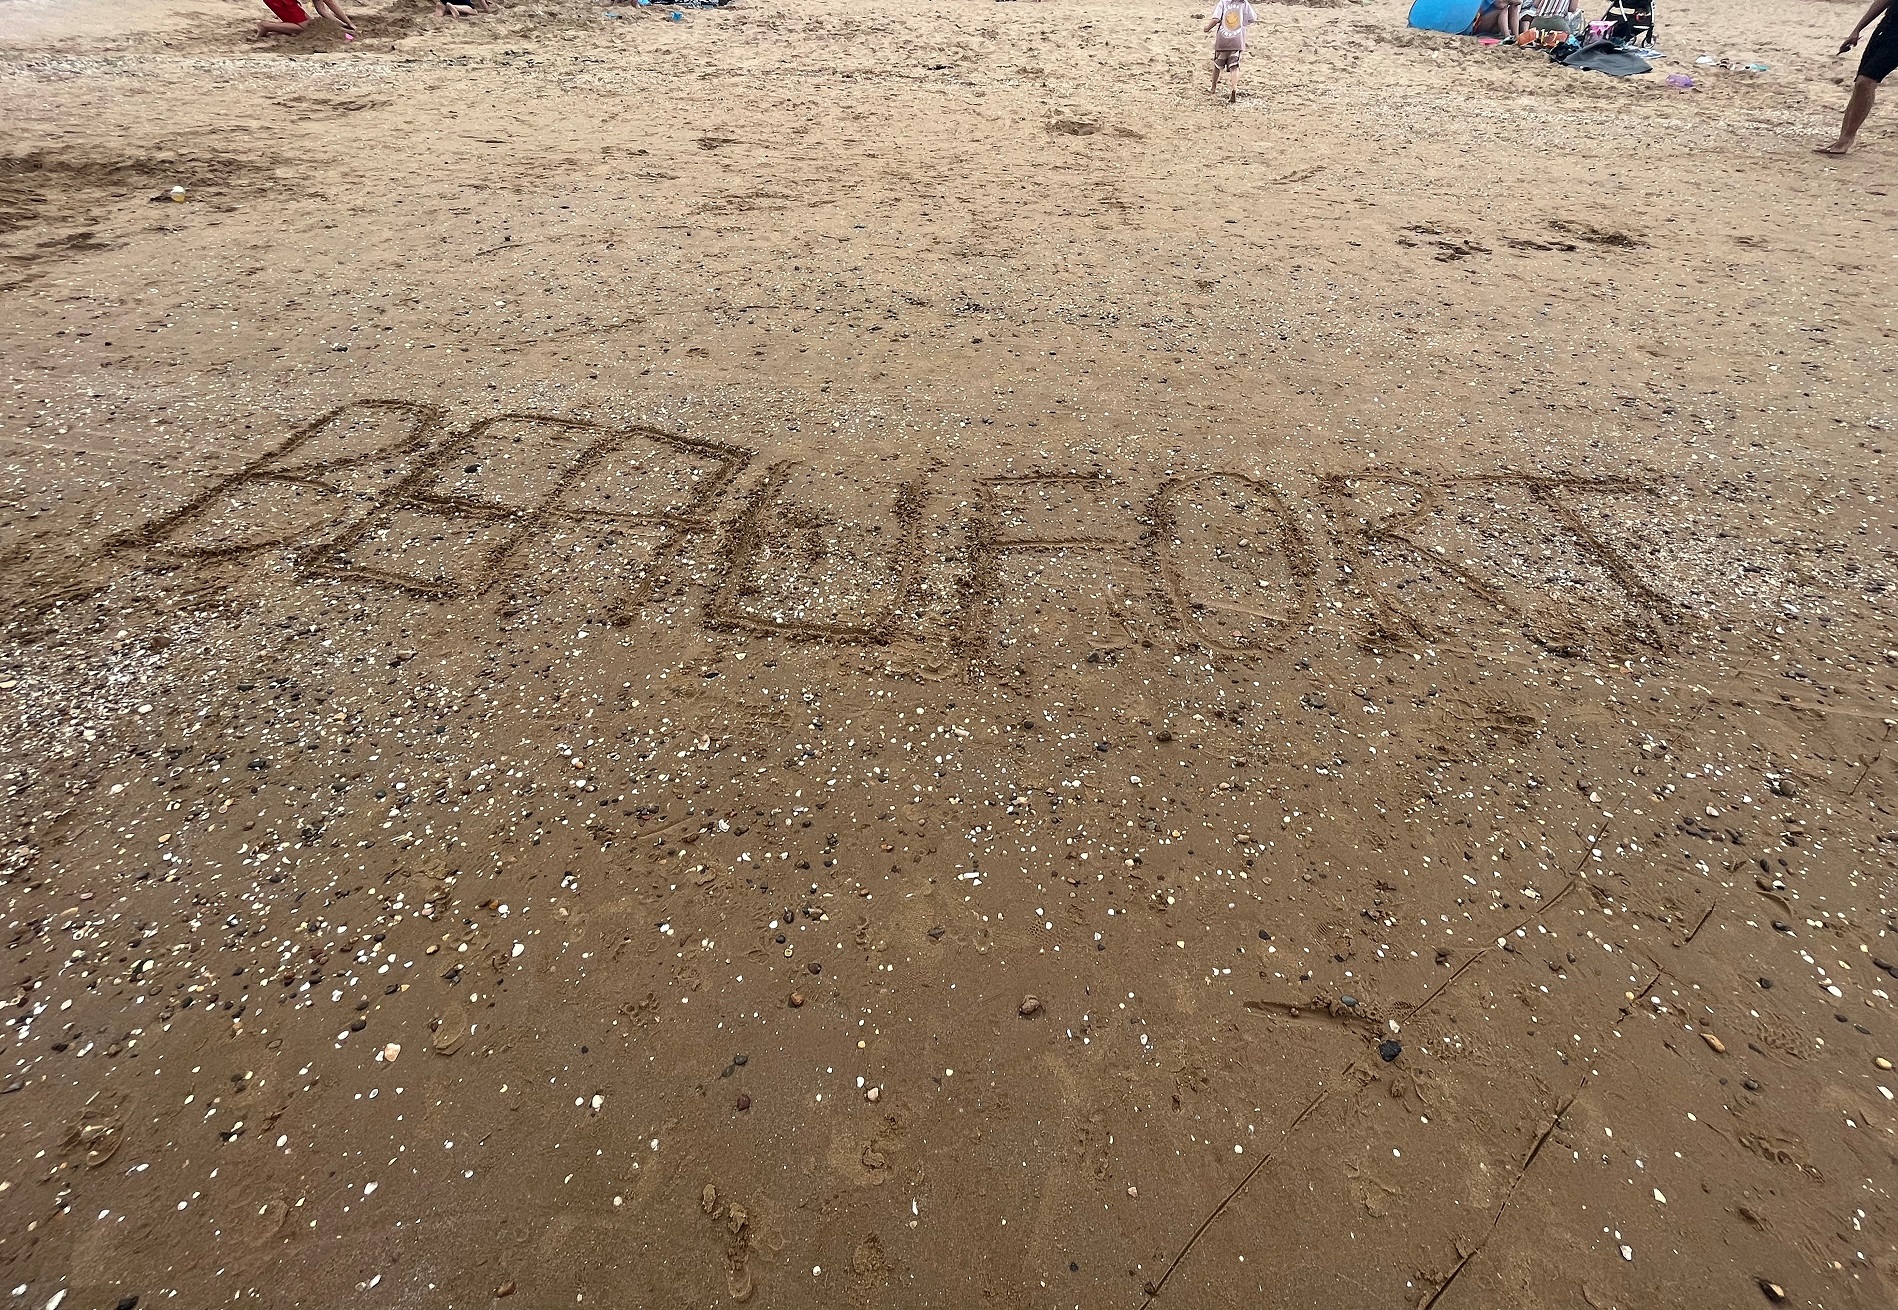 'Beaufort' written in the sand at the beach in Cleethorpes.